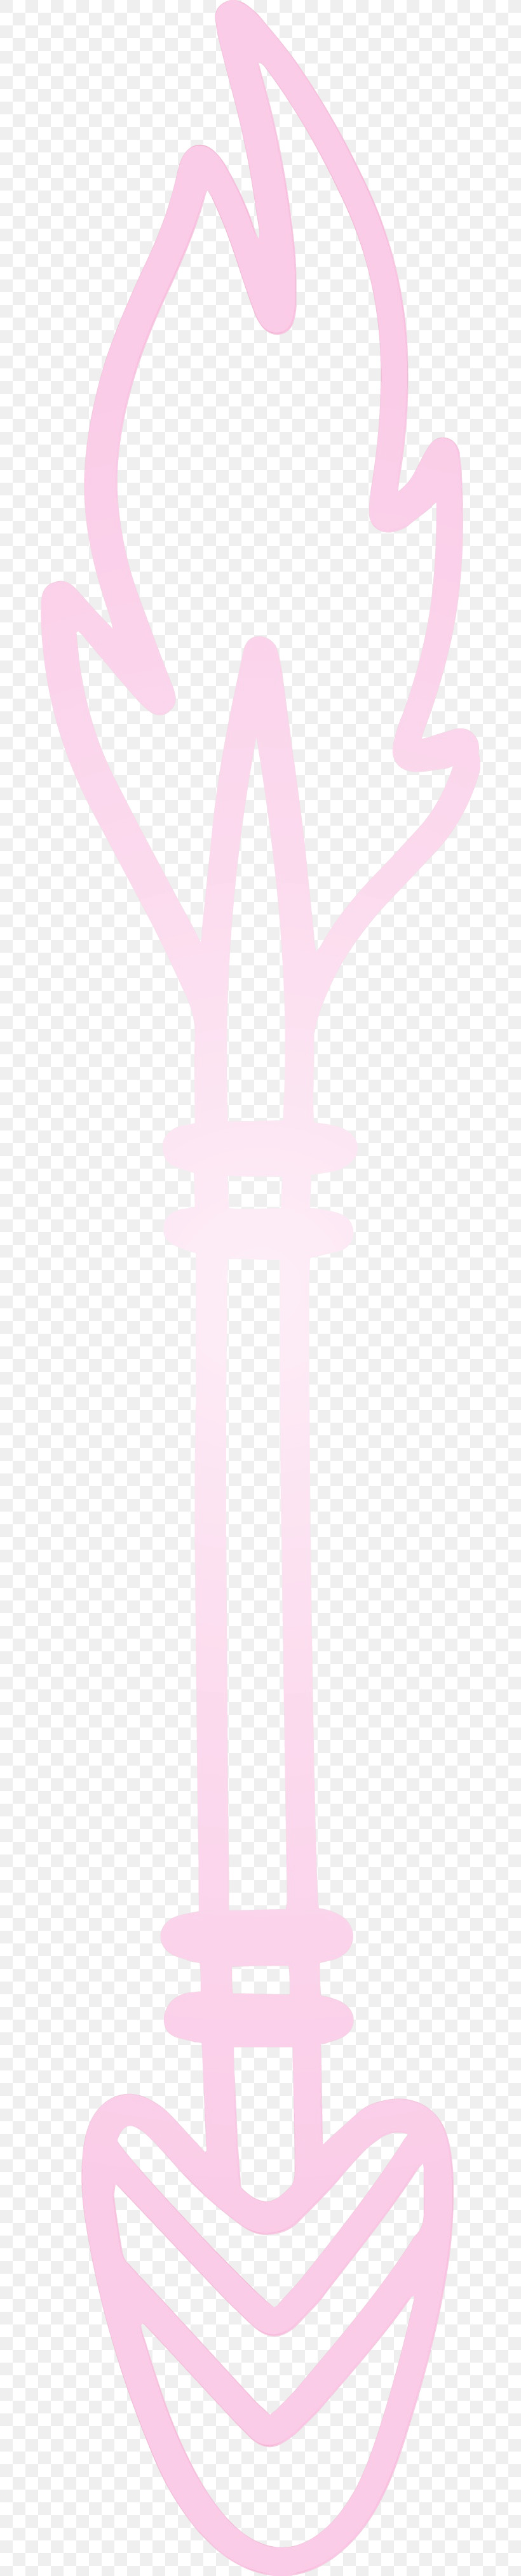 Pink Cross Material Property Symbol, PNG, 692x4056px, Boho Arrow, Cross, Cute Arrow, Material Property, Paint Download Free